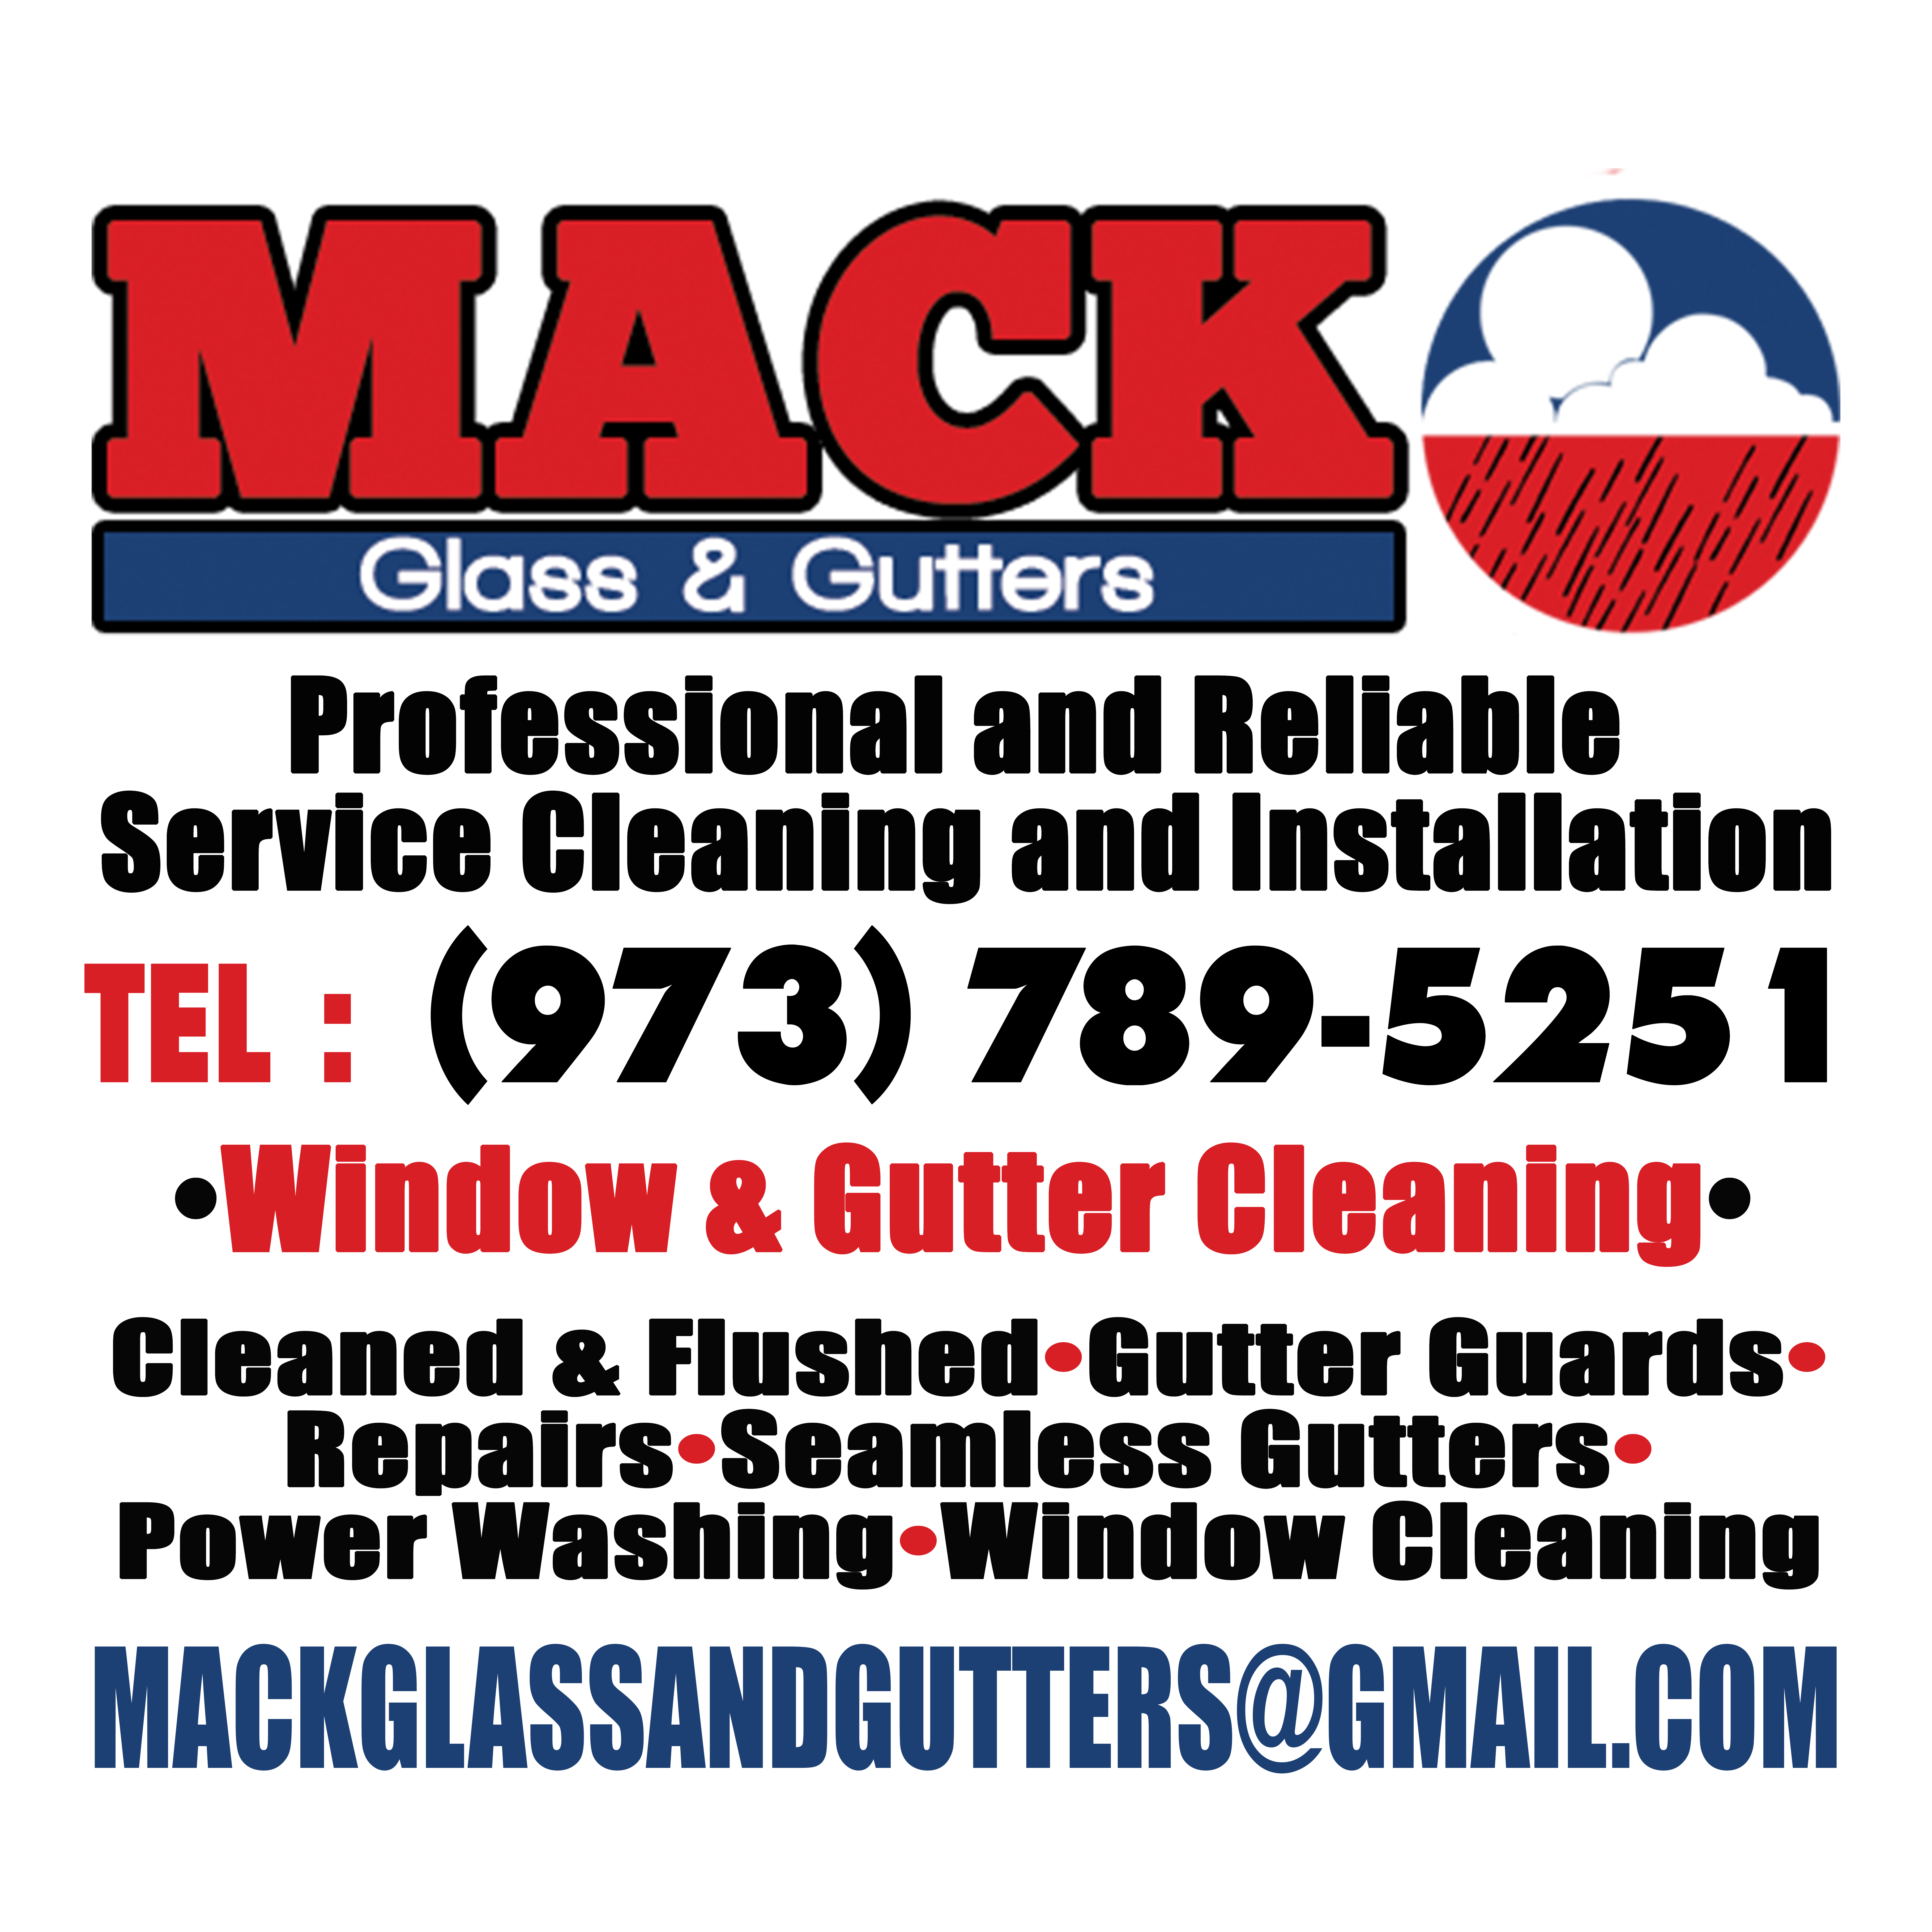 Mack Glass and Gutters Logo